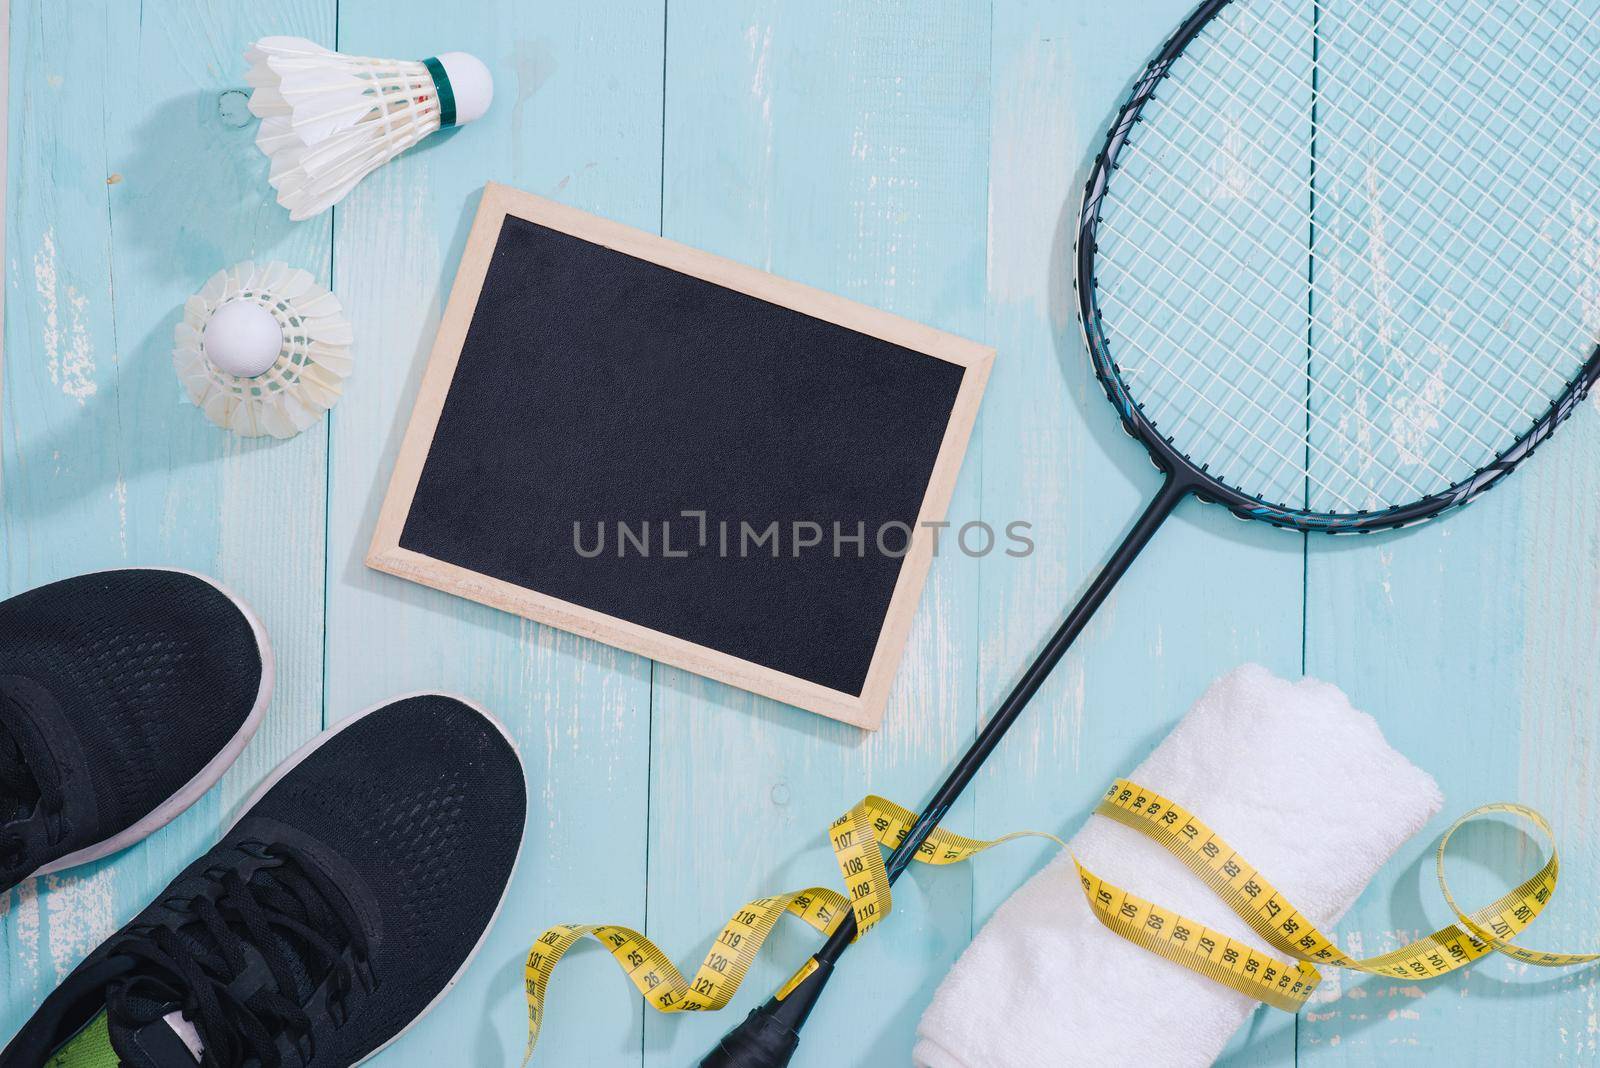 Top view of sport equipments, clock, tape measure, shoes, water bottle, towel, badminton racket and shuttlecock, Healthy lifestyle and fitness concept by makidotvn